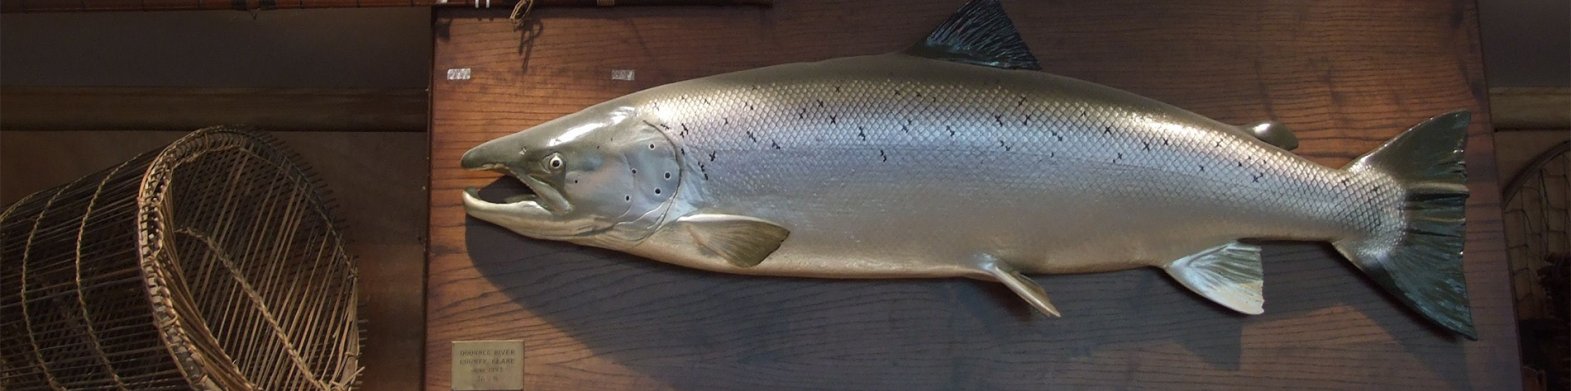 Salmon on display at The Burren Smokehouse in Clare